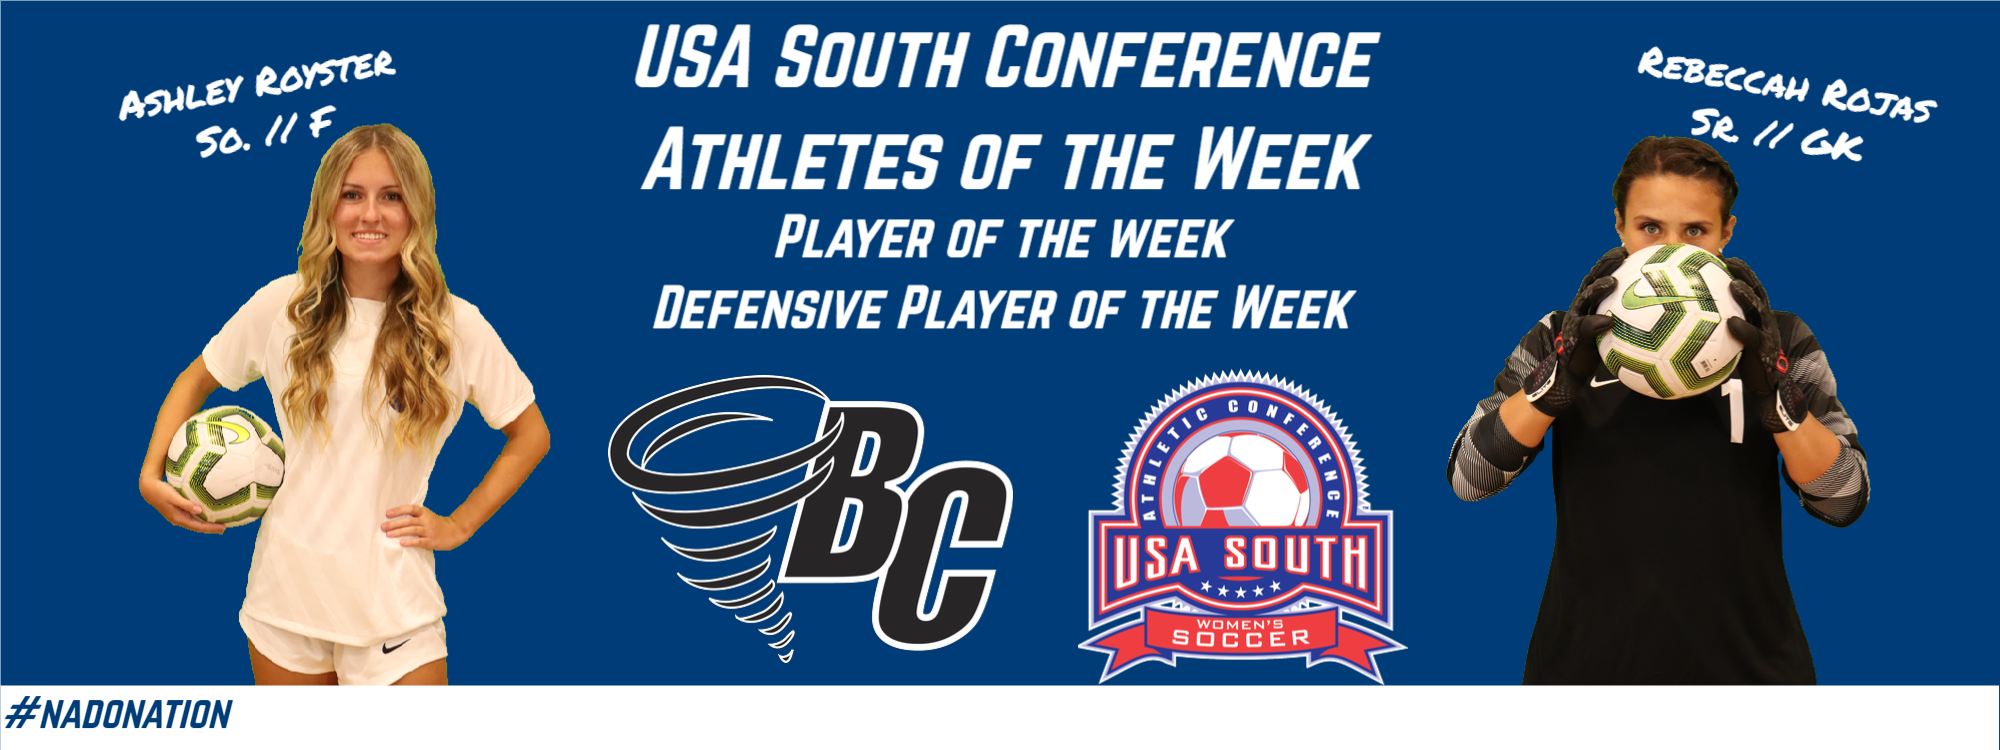 Rojas and Royster Earn Conference Weekly Honors